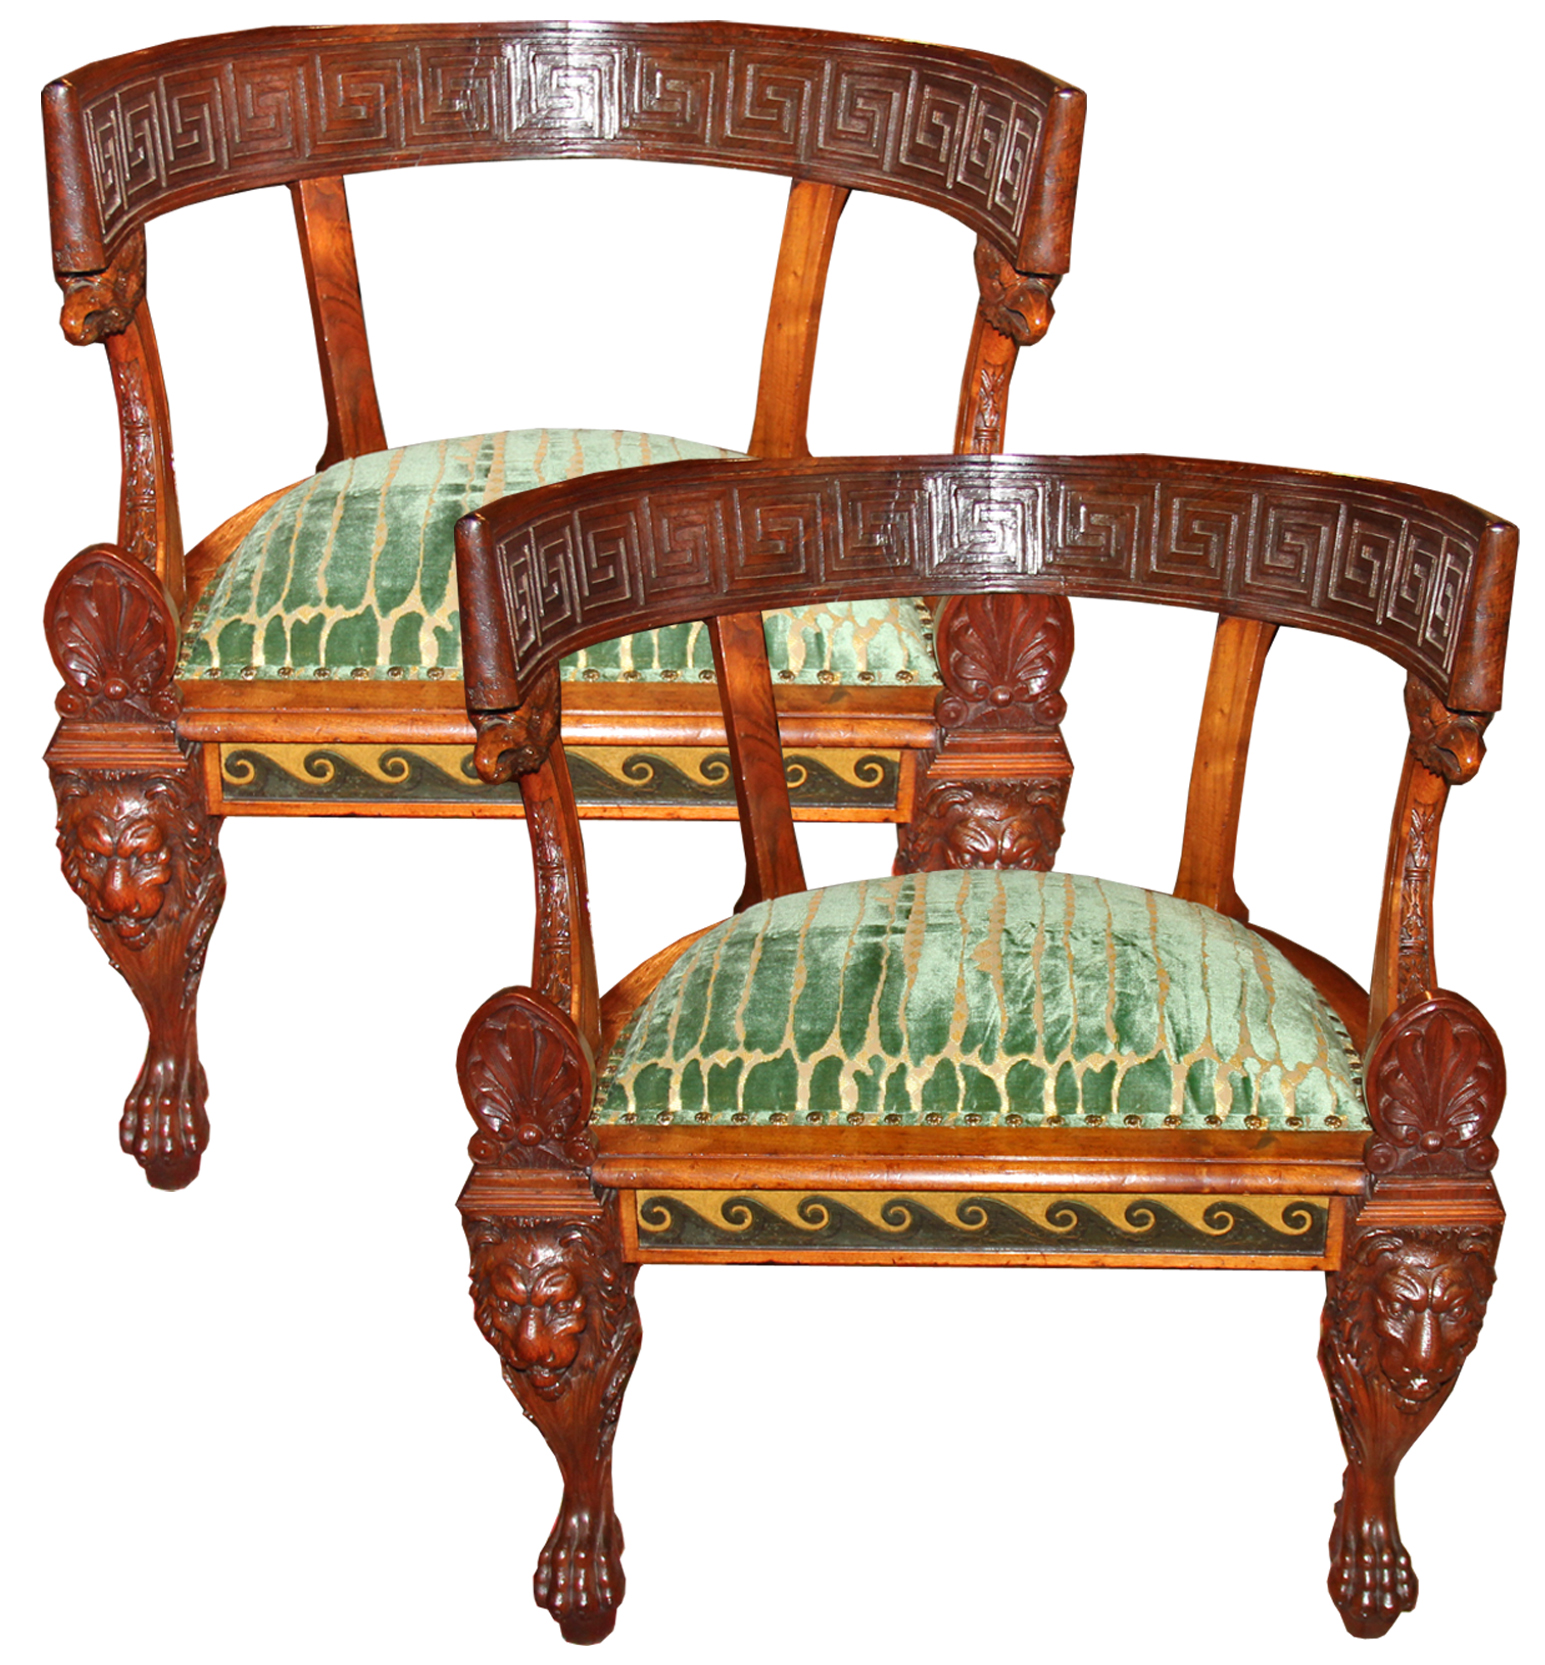 A Rare Pair of 19th Century Italian Neoclassical Rosewood Marquise Chairs No. 4463